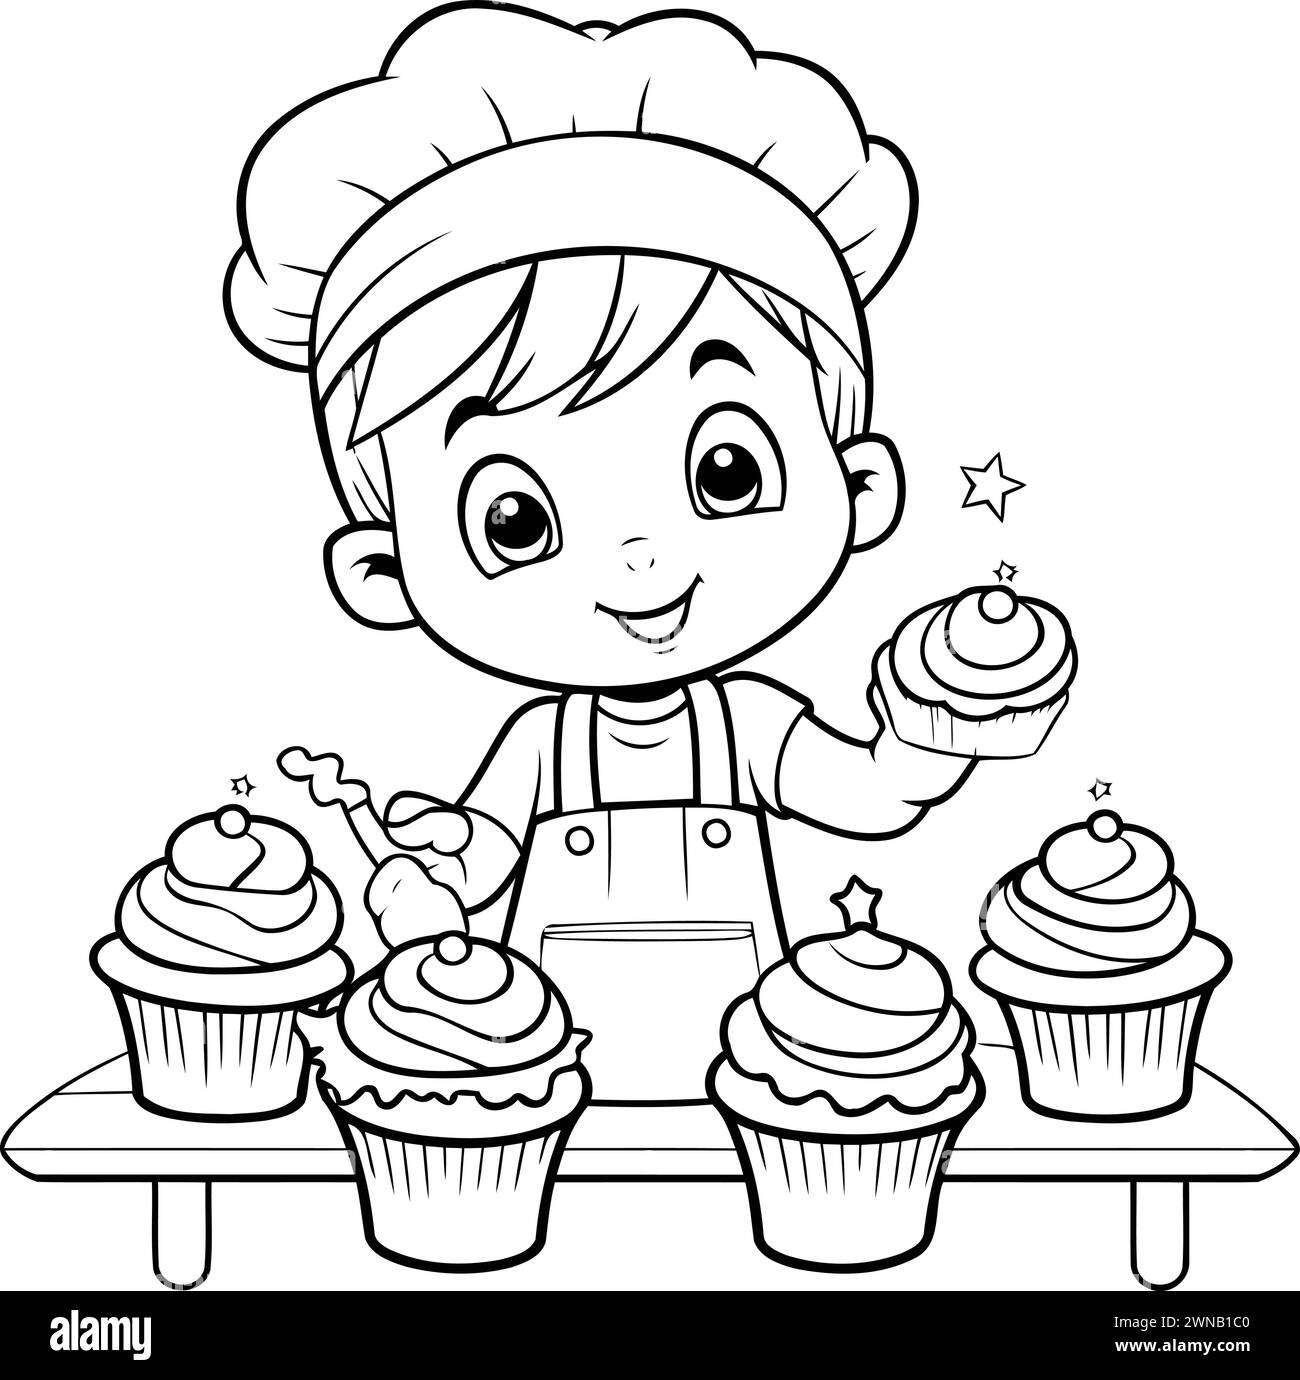 Black and White Cartoon Illustration of Cute Little Boy Chef with Cupcakes for Coloring Book Stock Vector